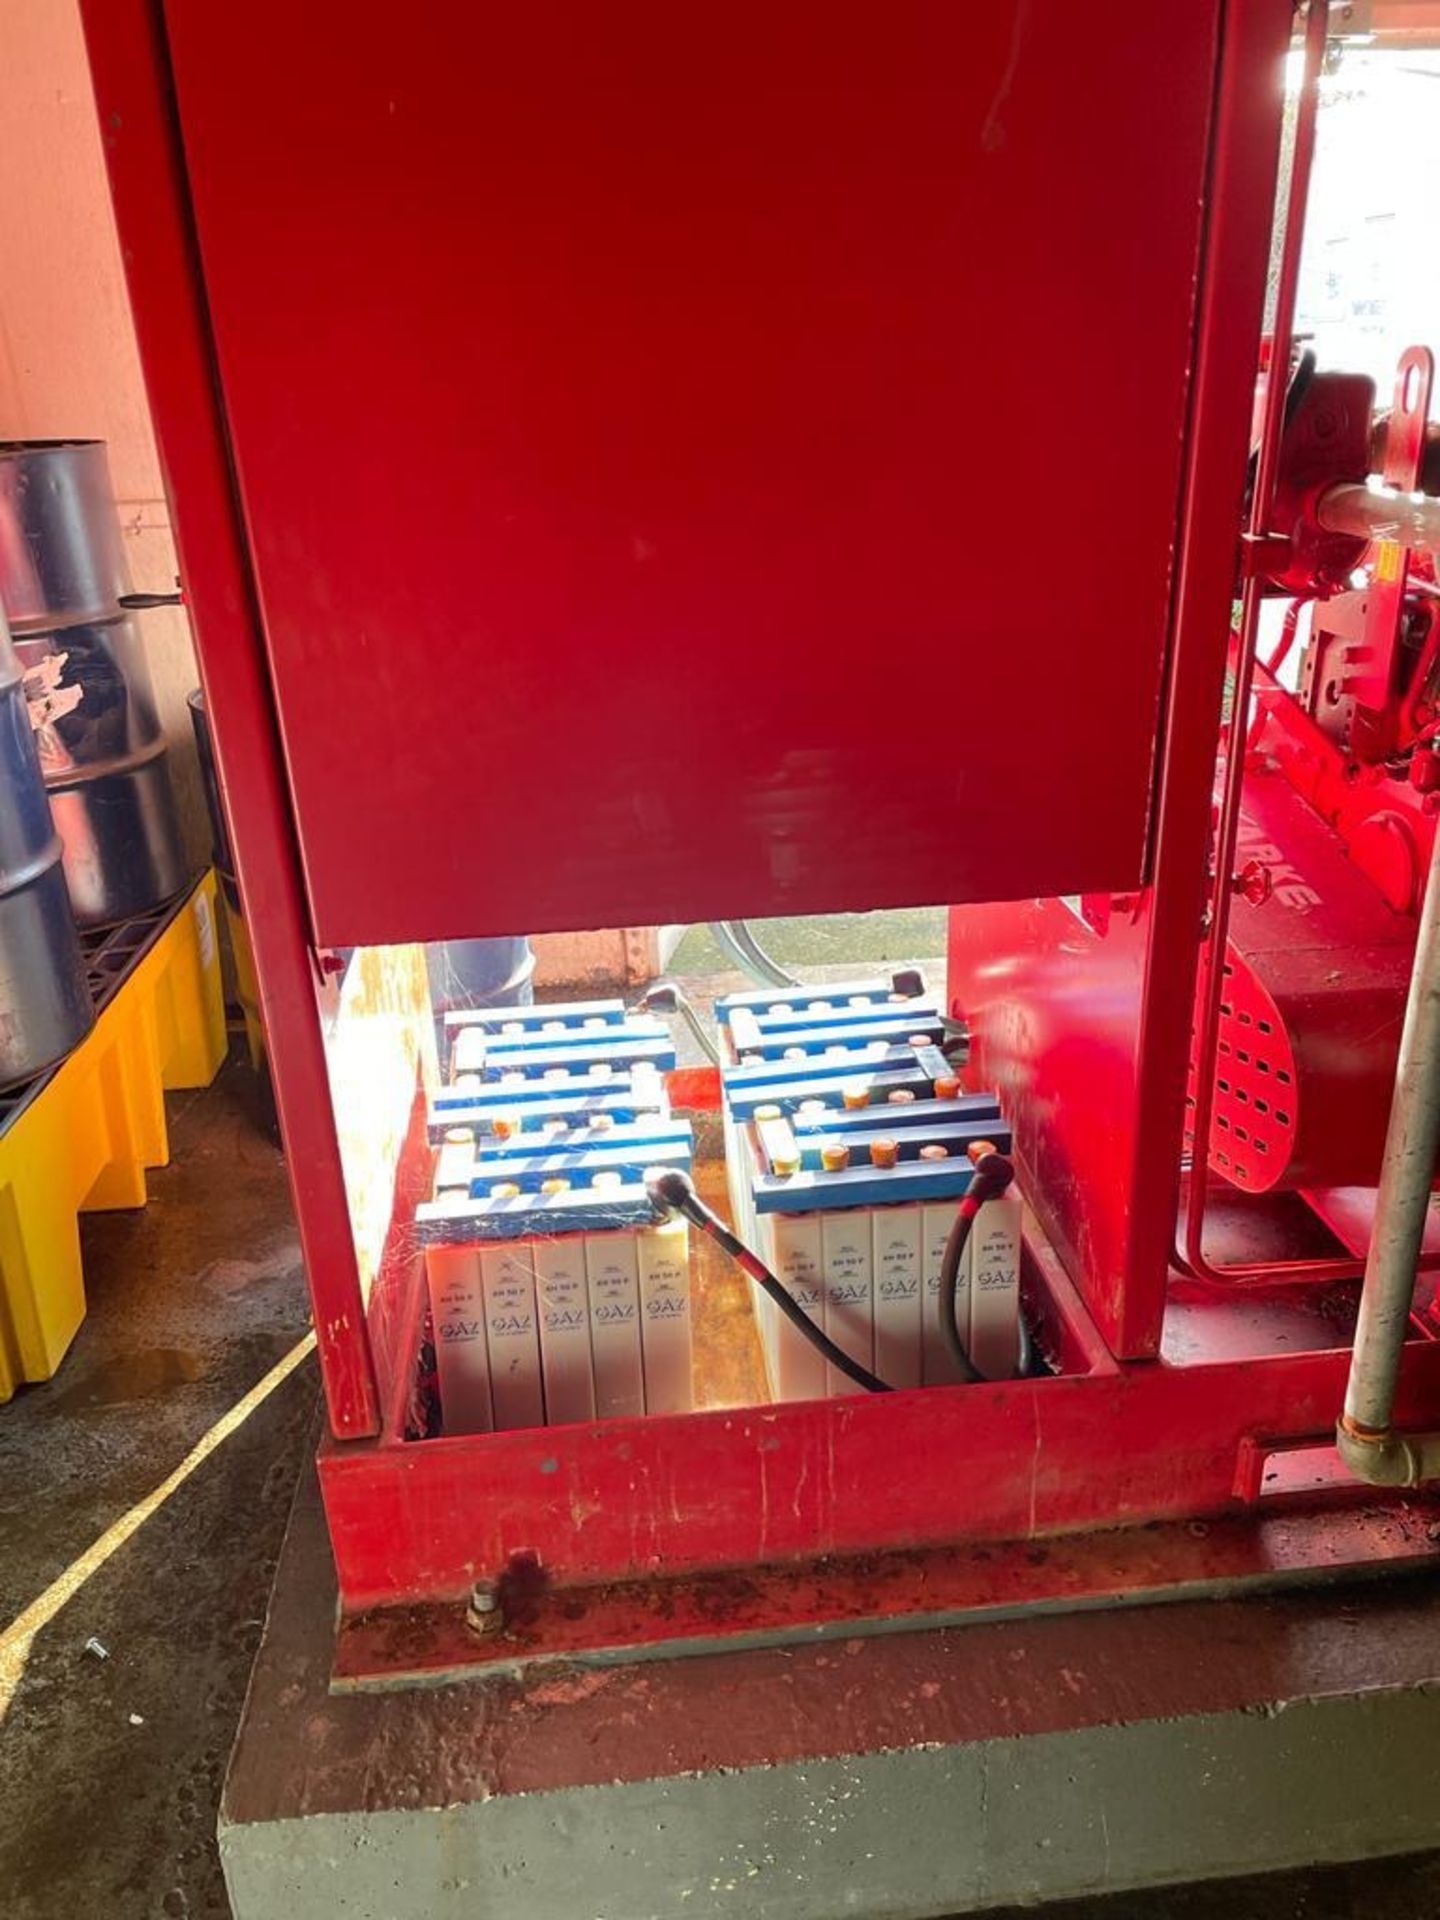 Tyco Clarke Grundfos DIESEL ENGINE EMERGENCY STANDBY FIRE PUMP, 125 hours at time of listing, fitted - Image 8 of 10